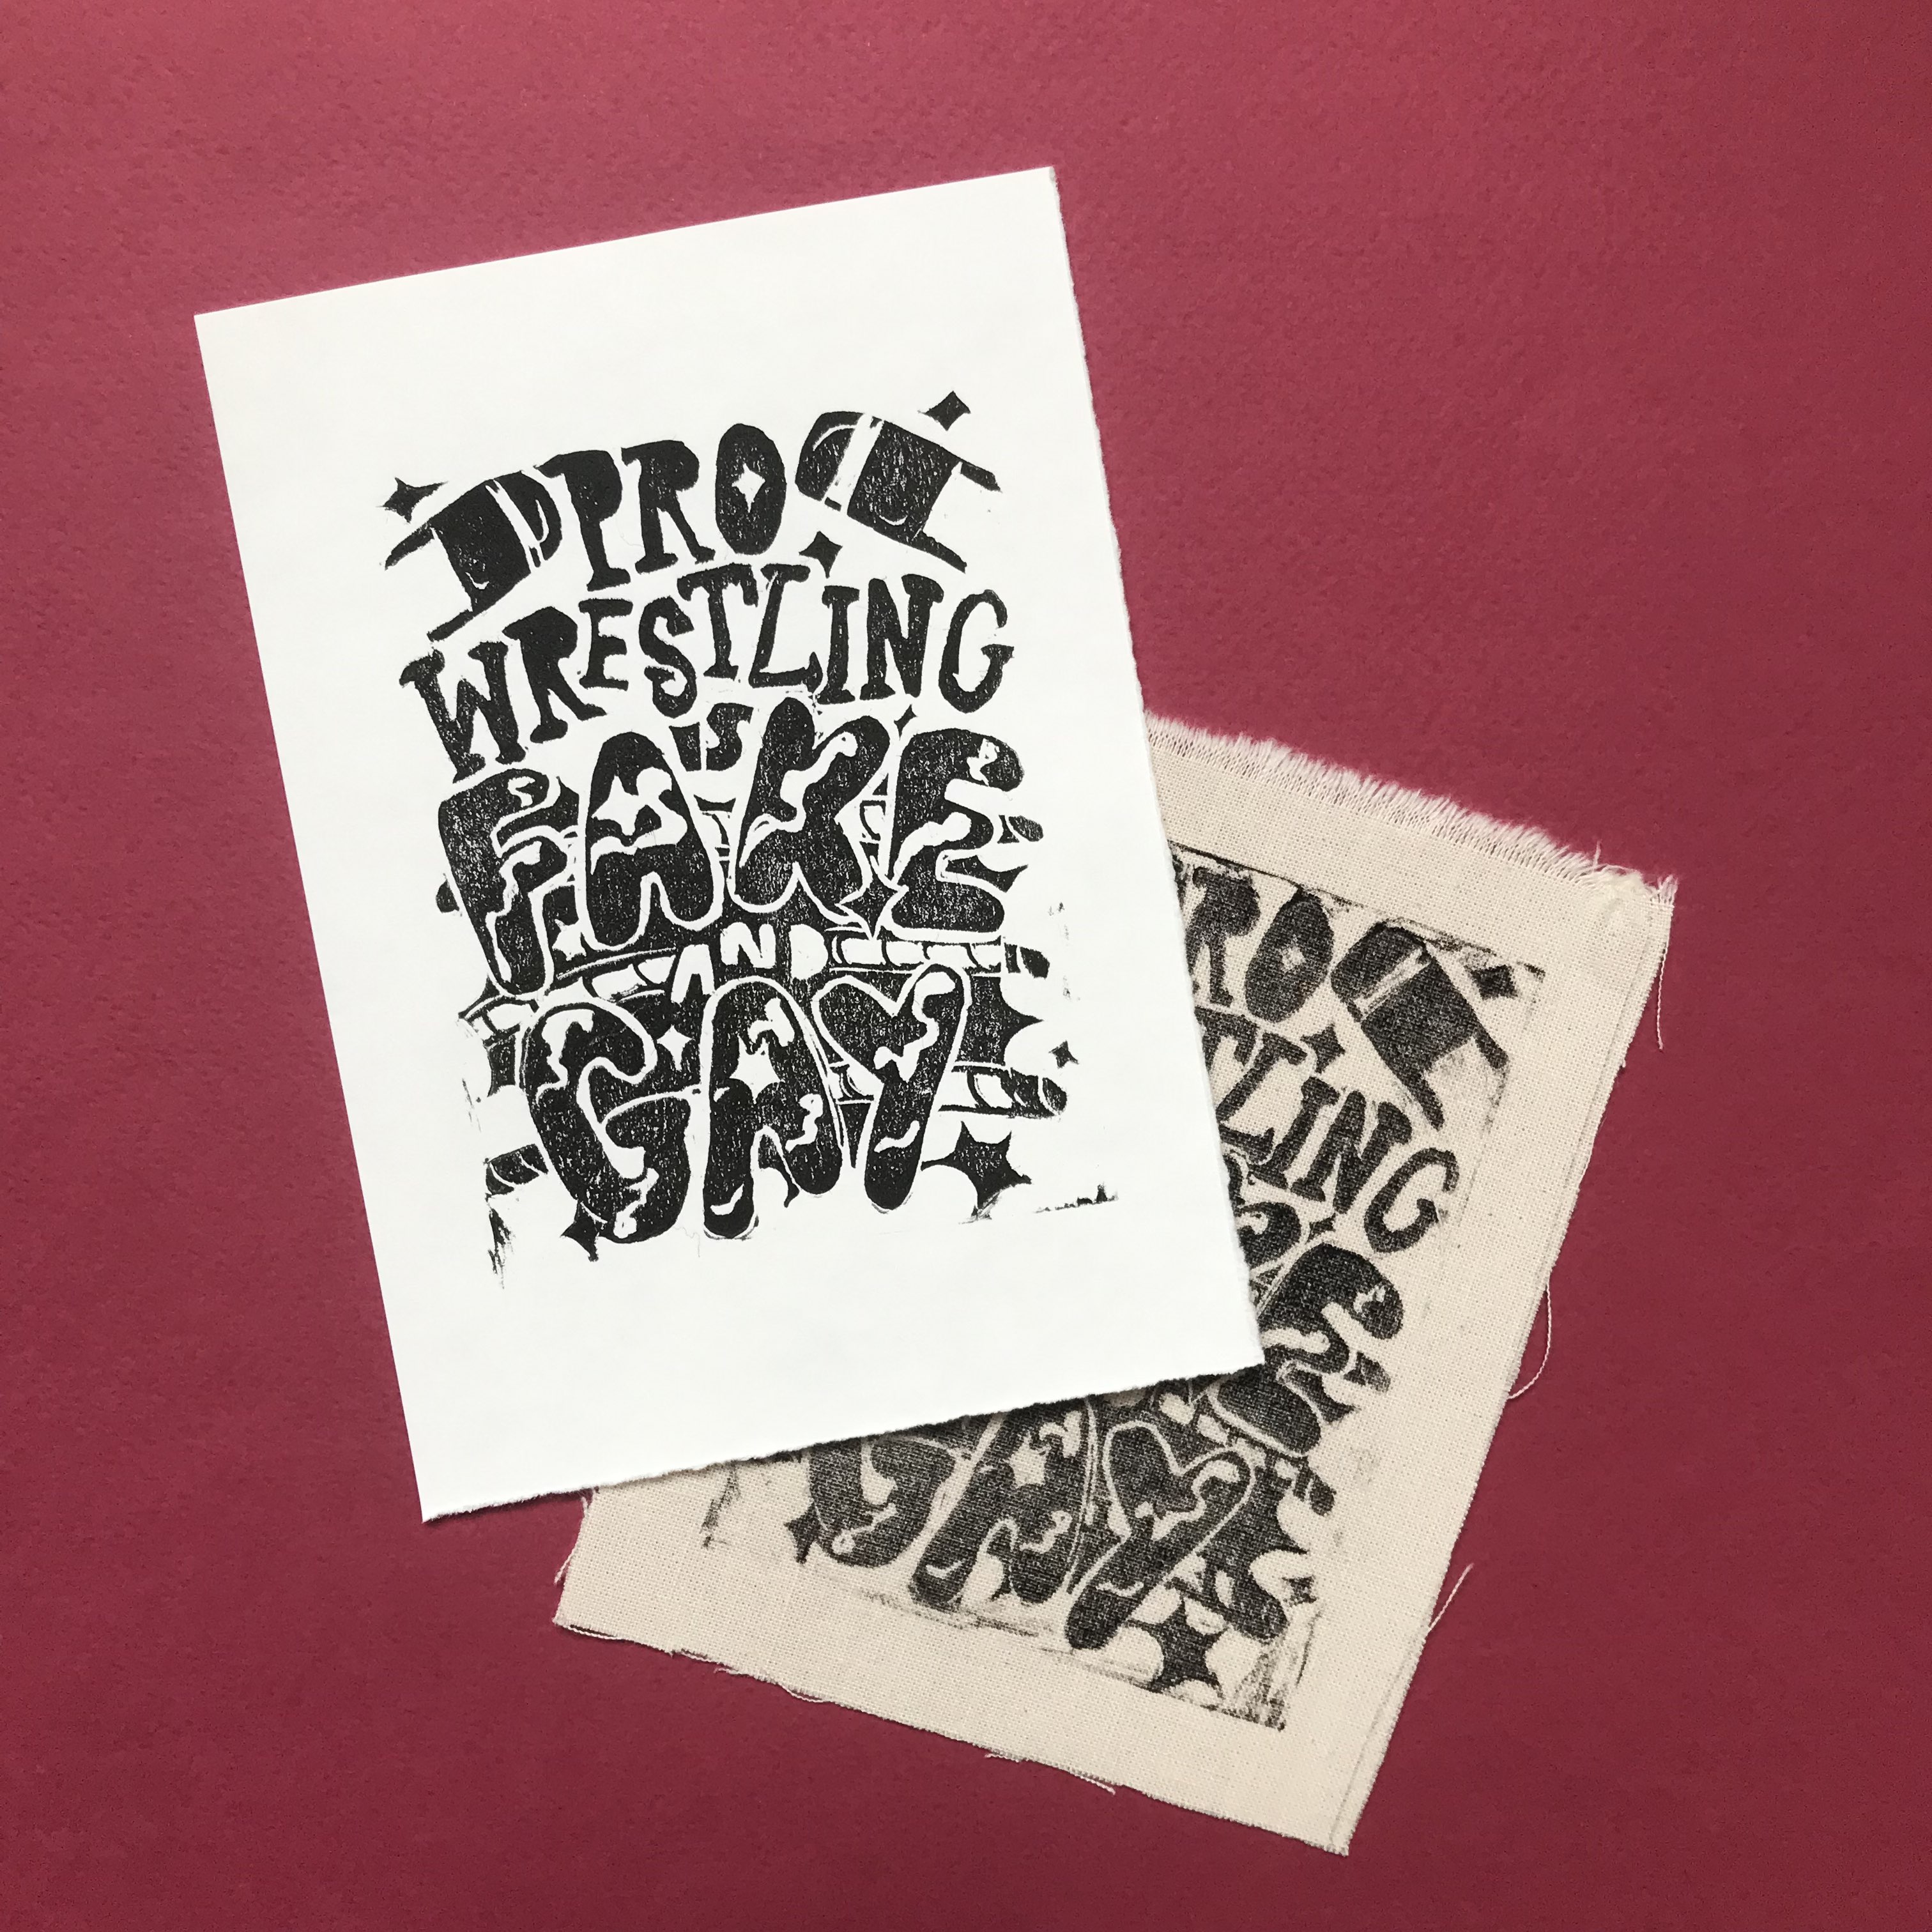 A product photo against a dark red background of black linoprint in black on white paper and fabric of stylized bubble text reading 'PRO WRESTLING IS FAKE AND GAY' with ring ropes reminiscent of a wrestling ring behind it.